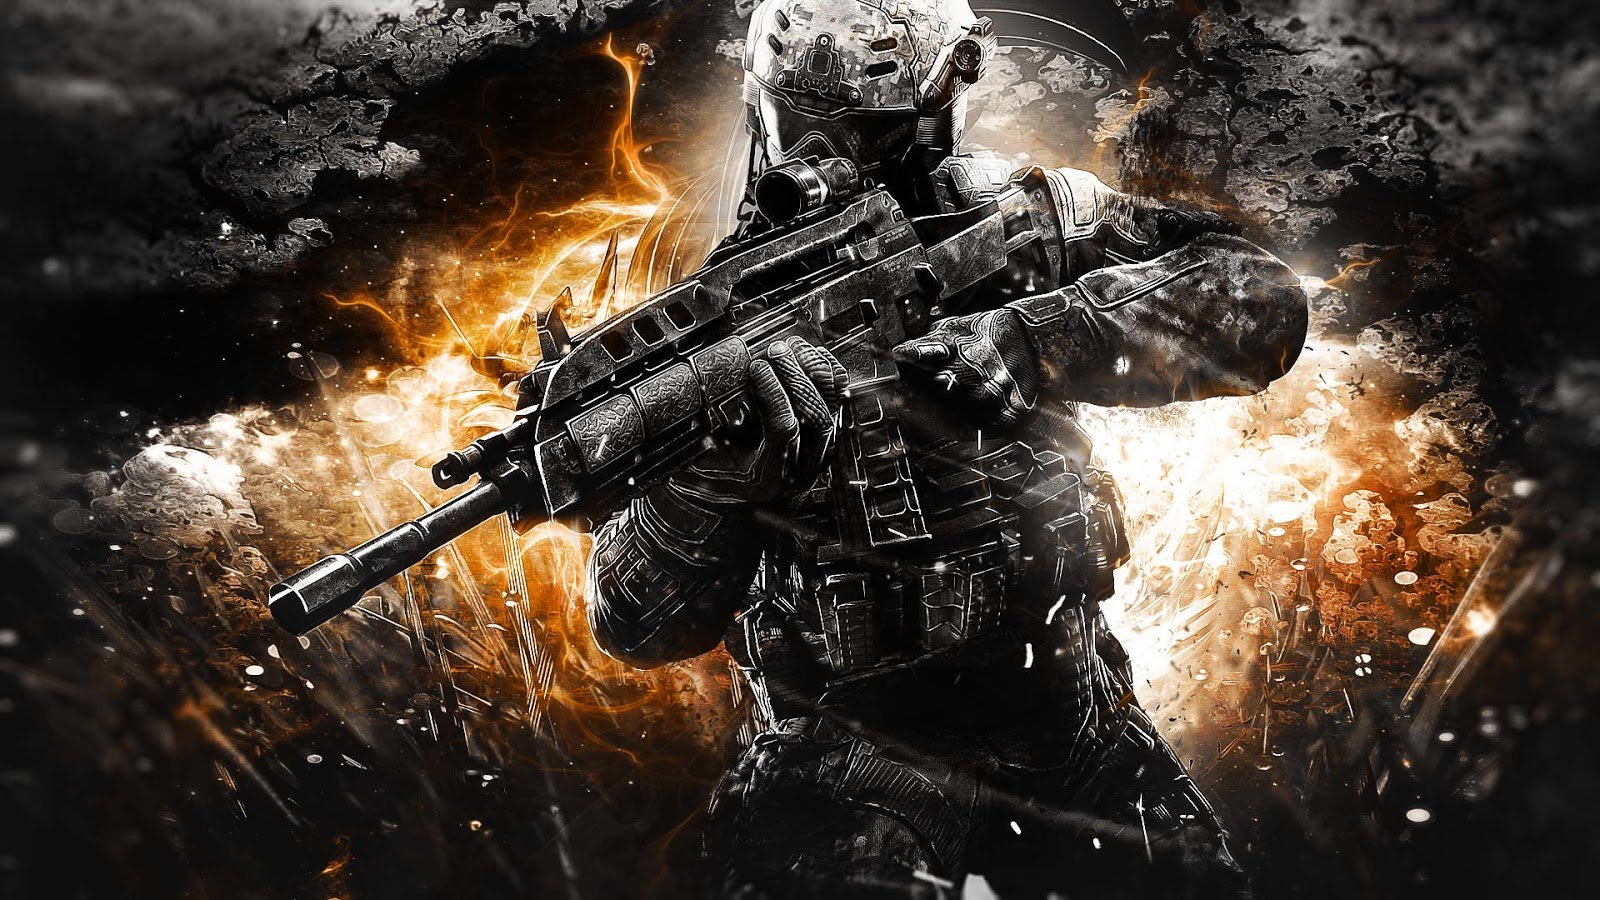 Call Of Duty Zombies Wallpapercod Black Ops Zombies Wallpapers Hd